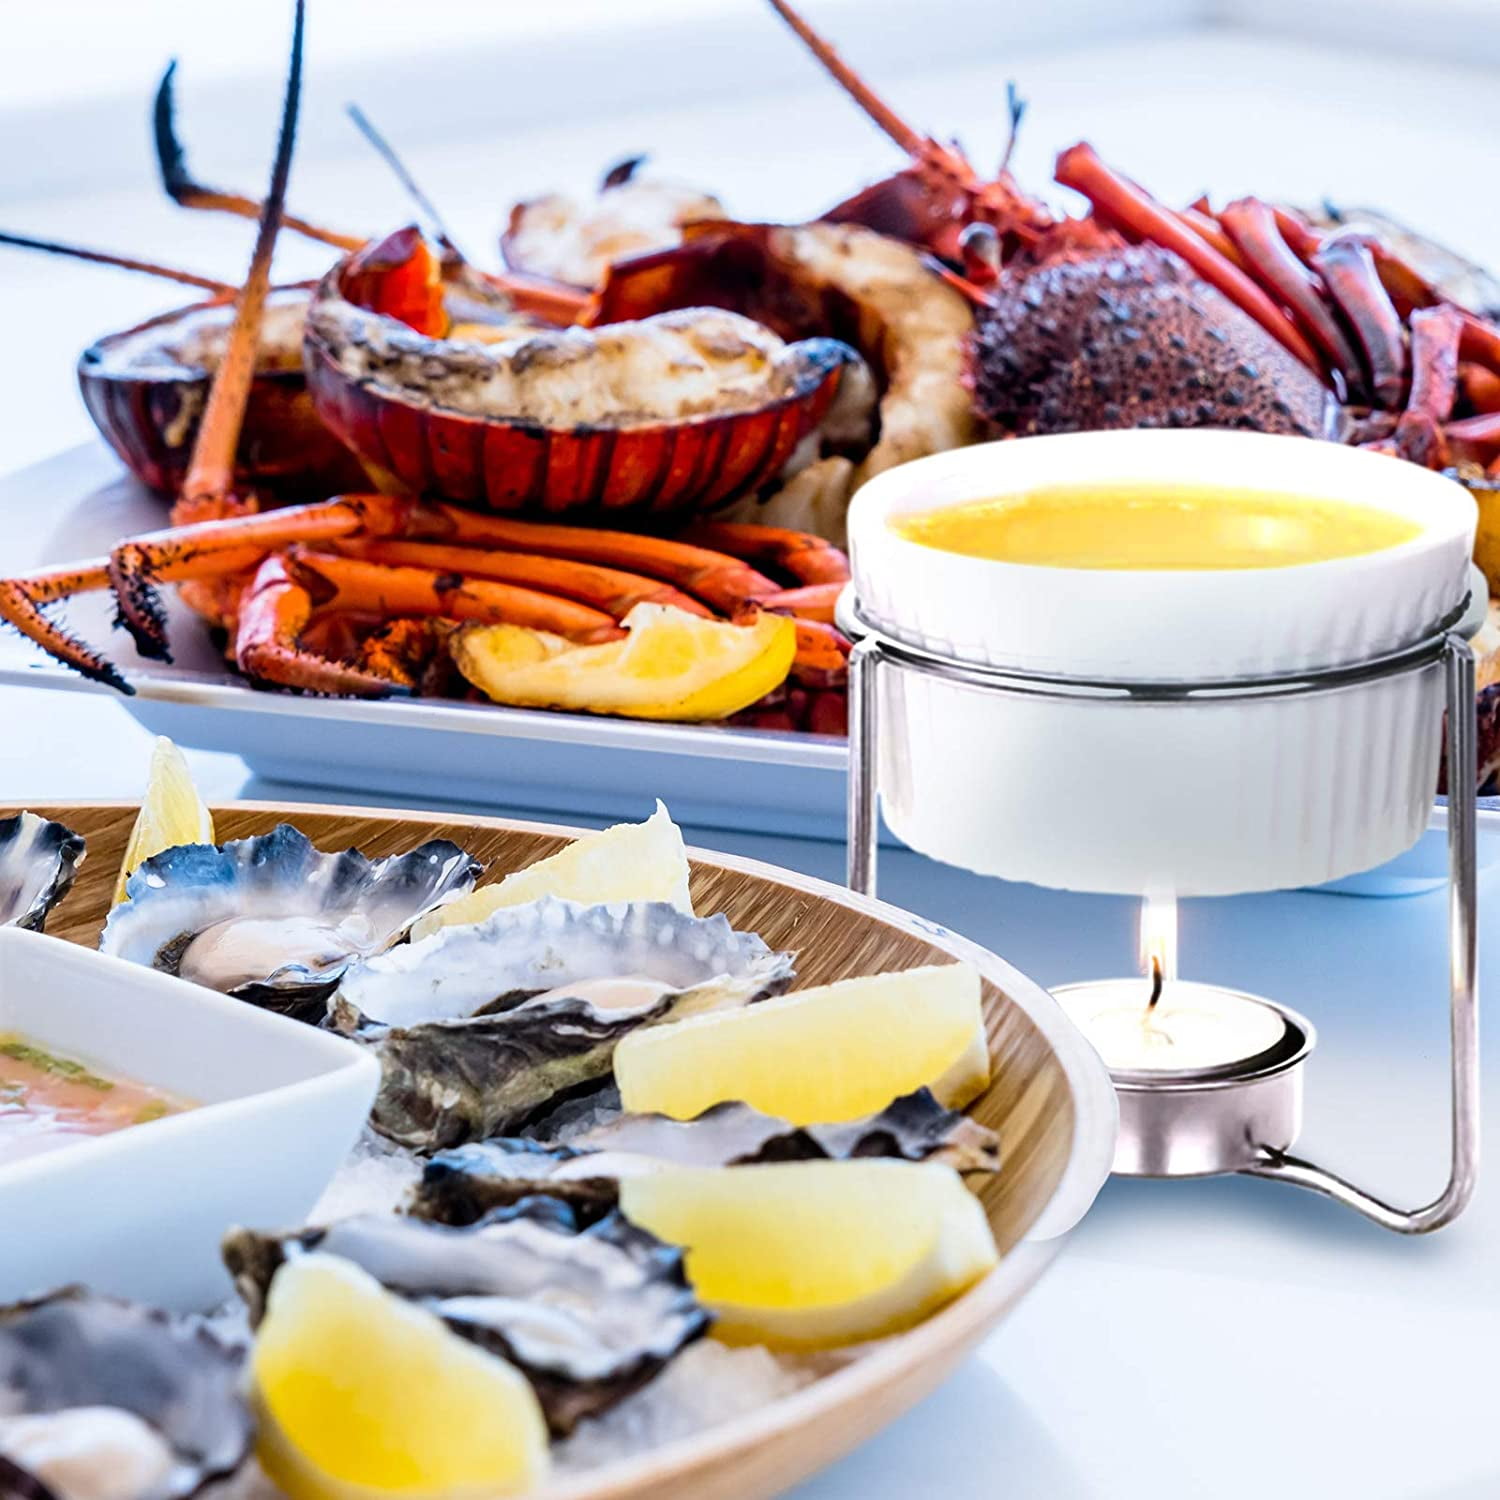 WhiteRhino 7oz Lobster Butter Warmers,Ceramic Butter Warmer for  Seafood,Chocolate,Cheese 